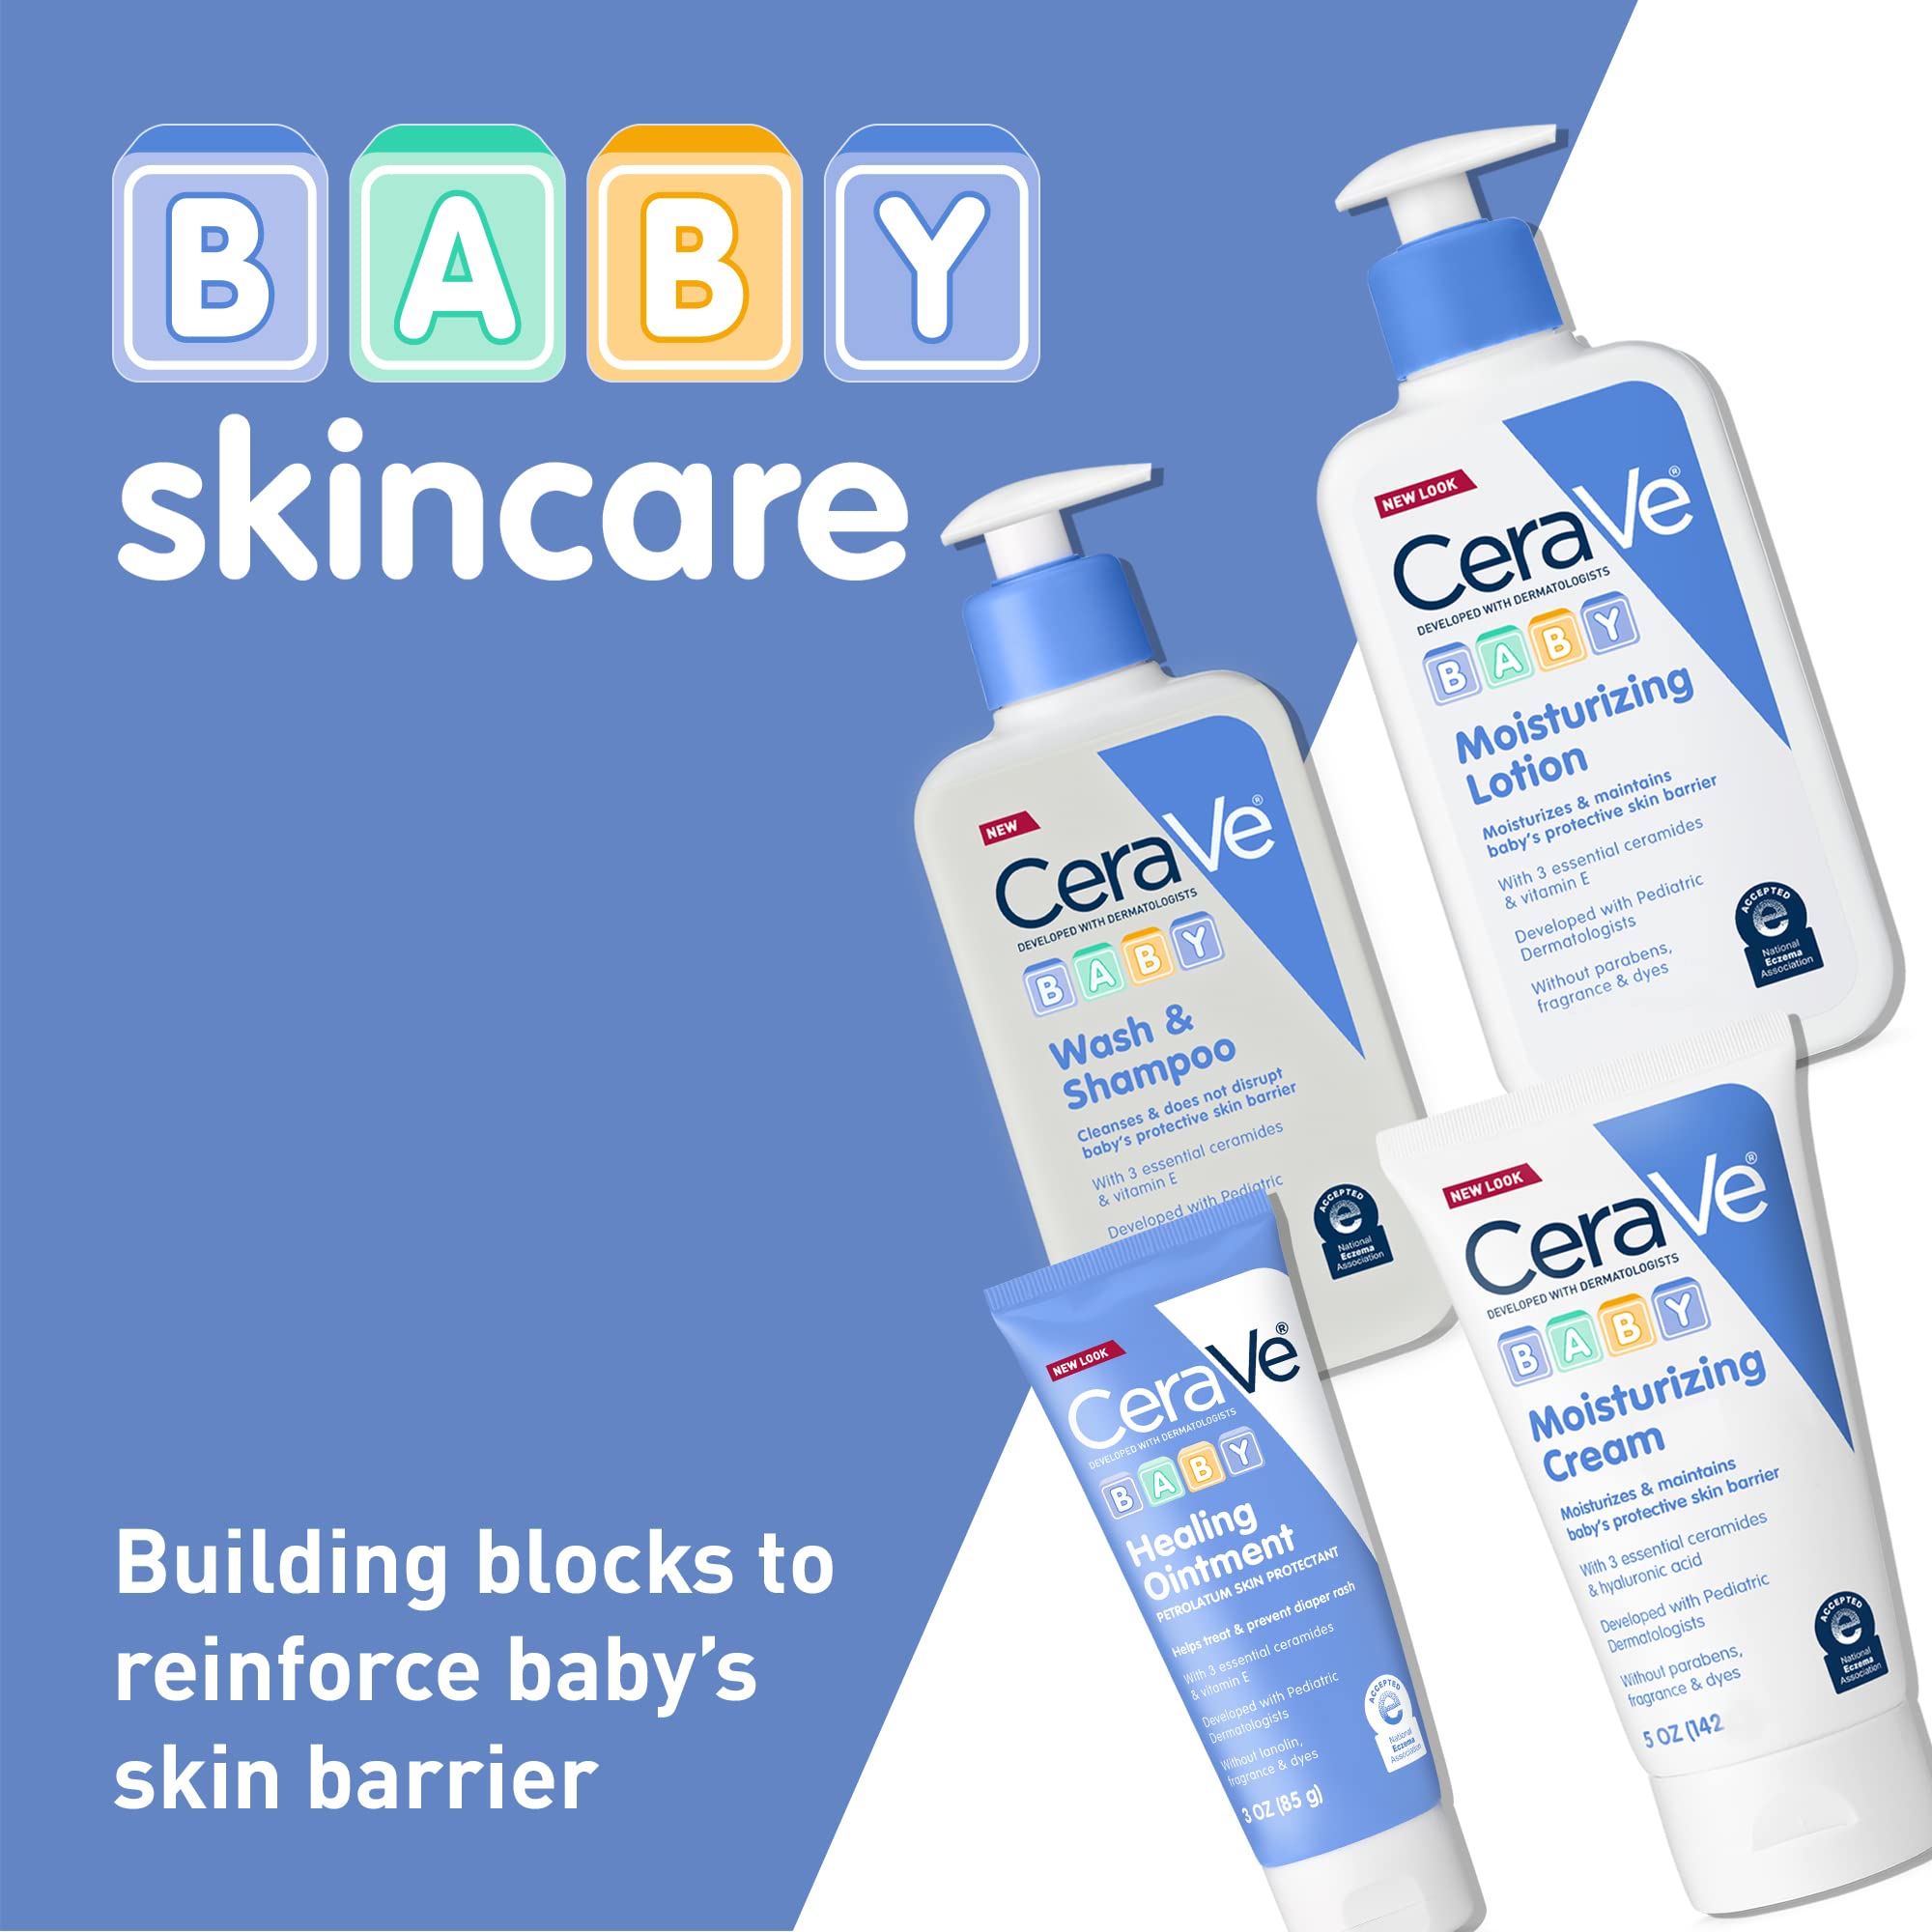 CeraVe Baby Cream | Gentle Moisturizing Cream with Hyaluronic Acid | Paraben, Phthalate, & Fragrance Free | 5 Ounce